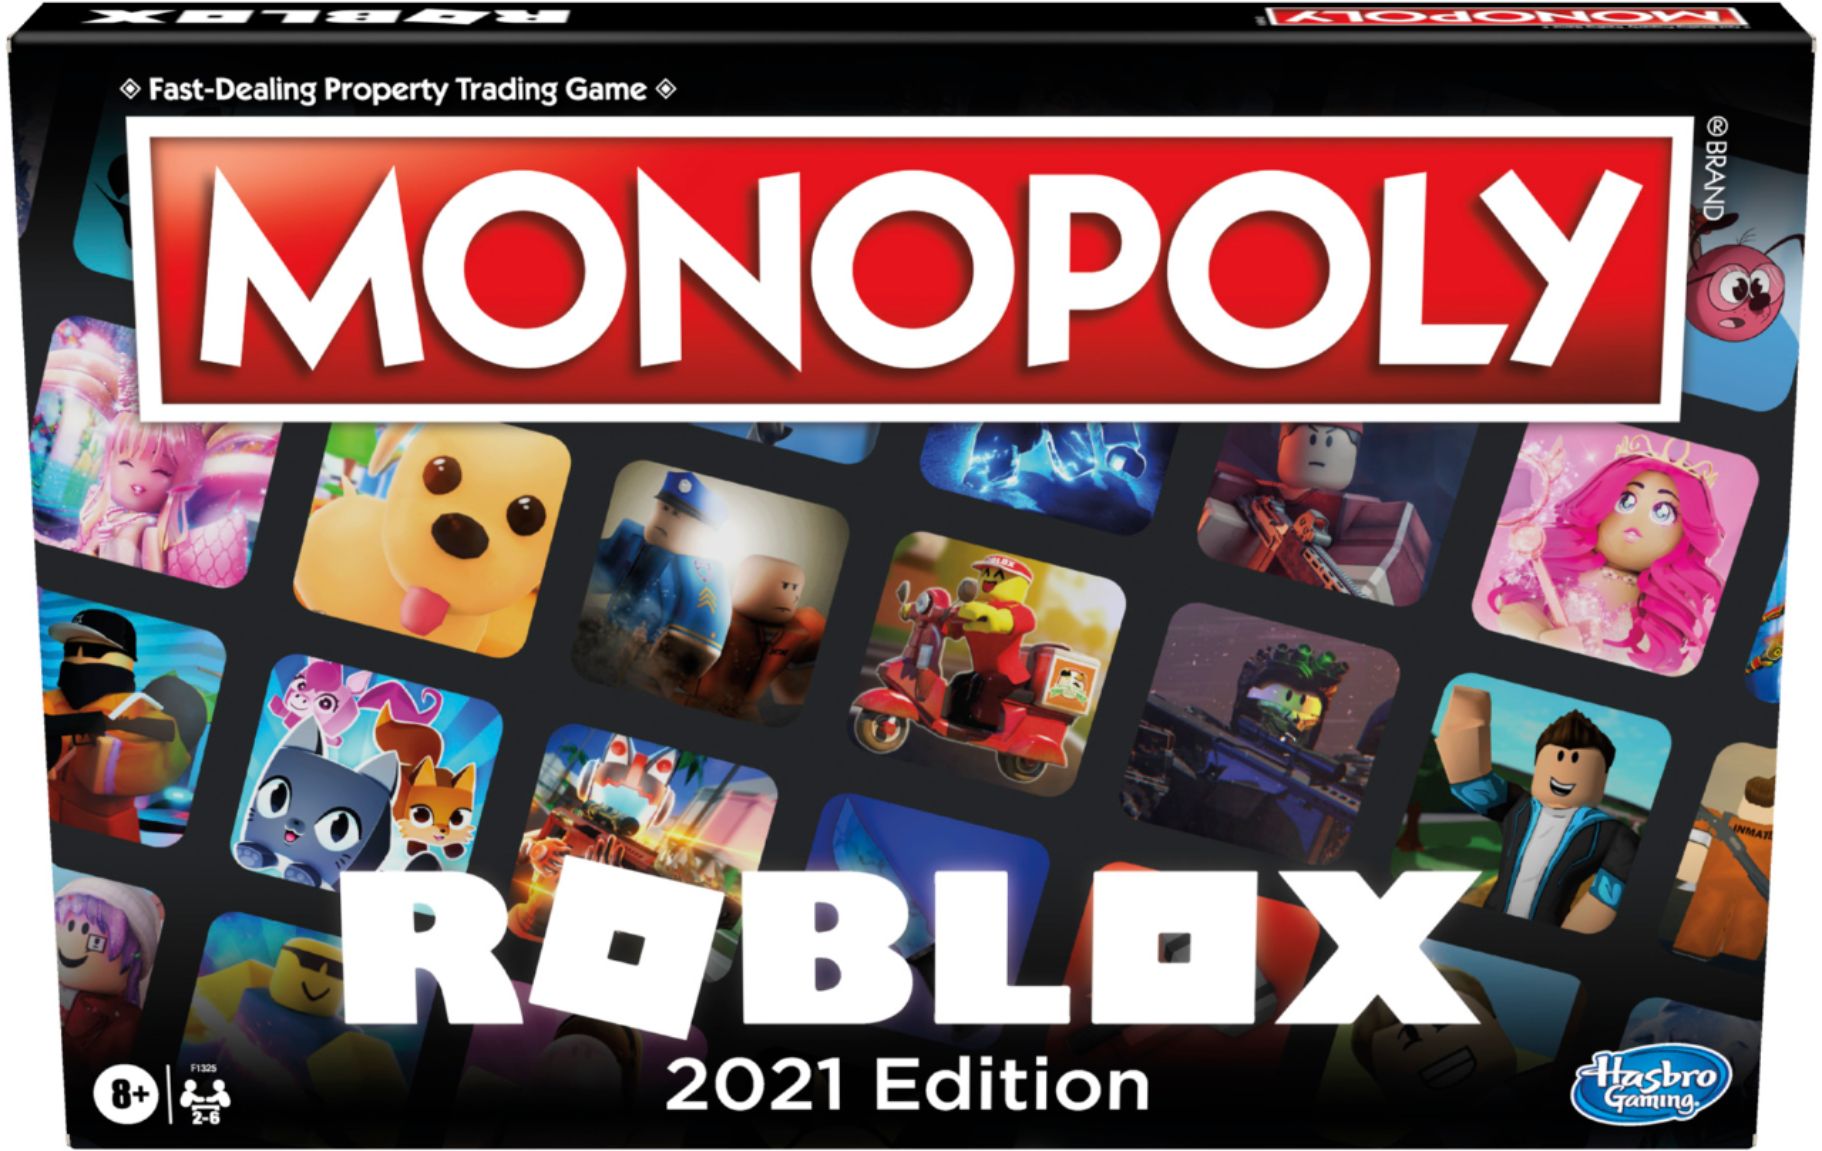 Bring Roblox To the Real World with New NERF and Monopoly Games